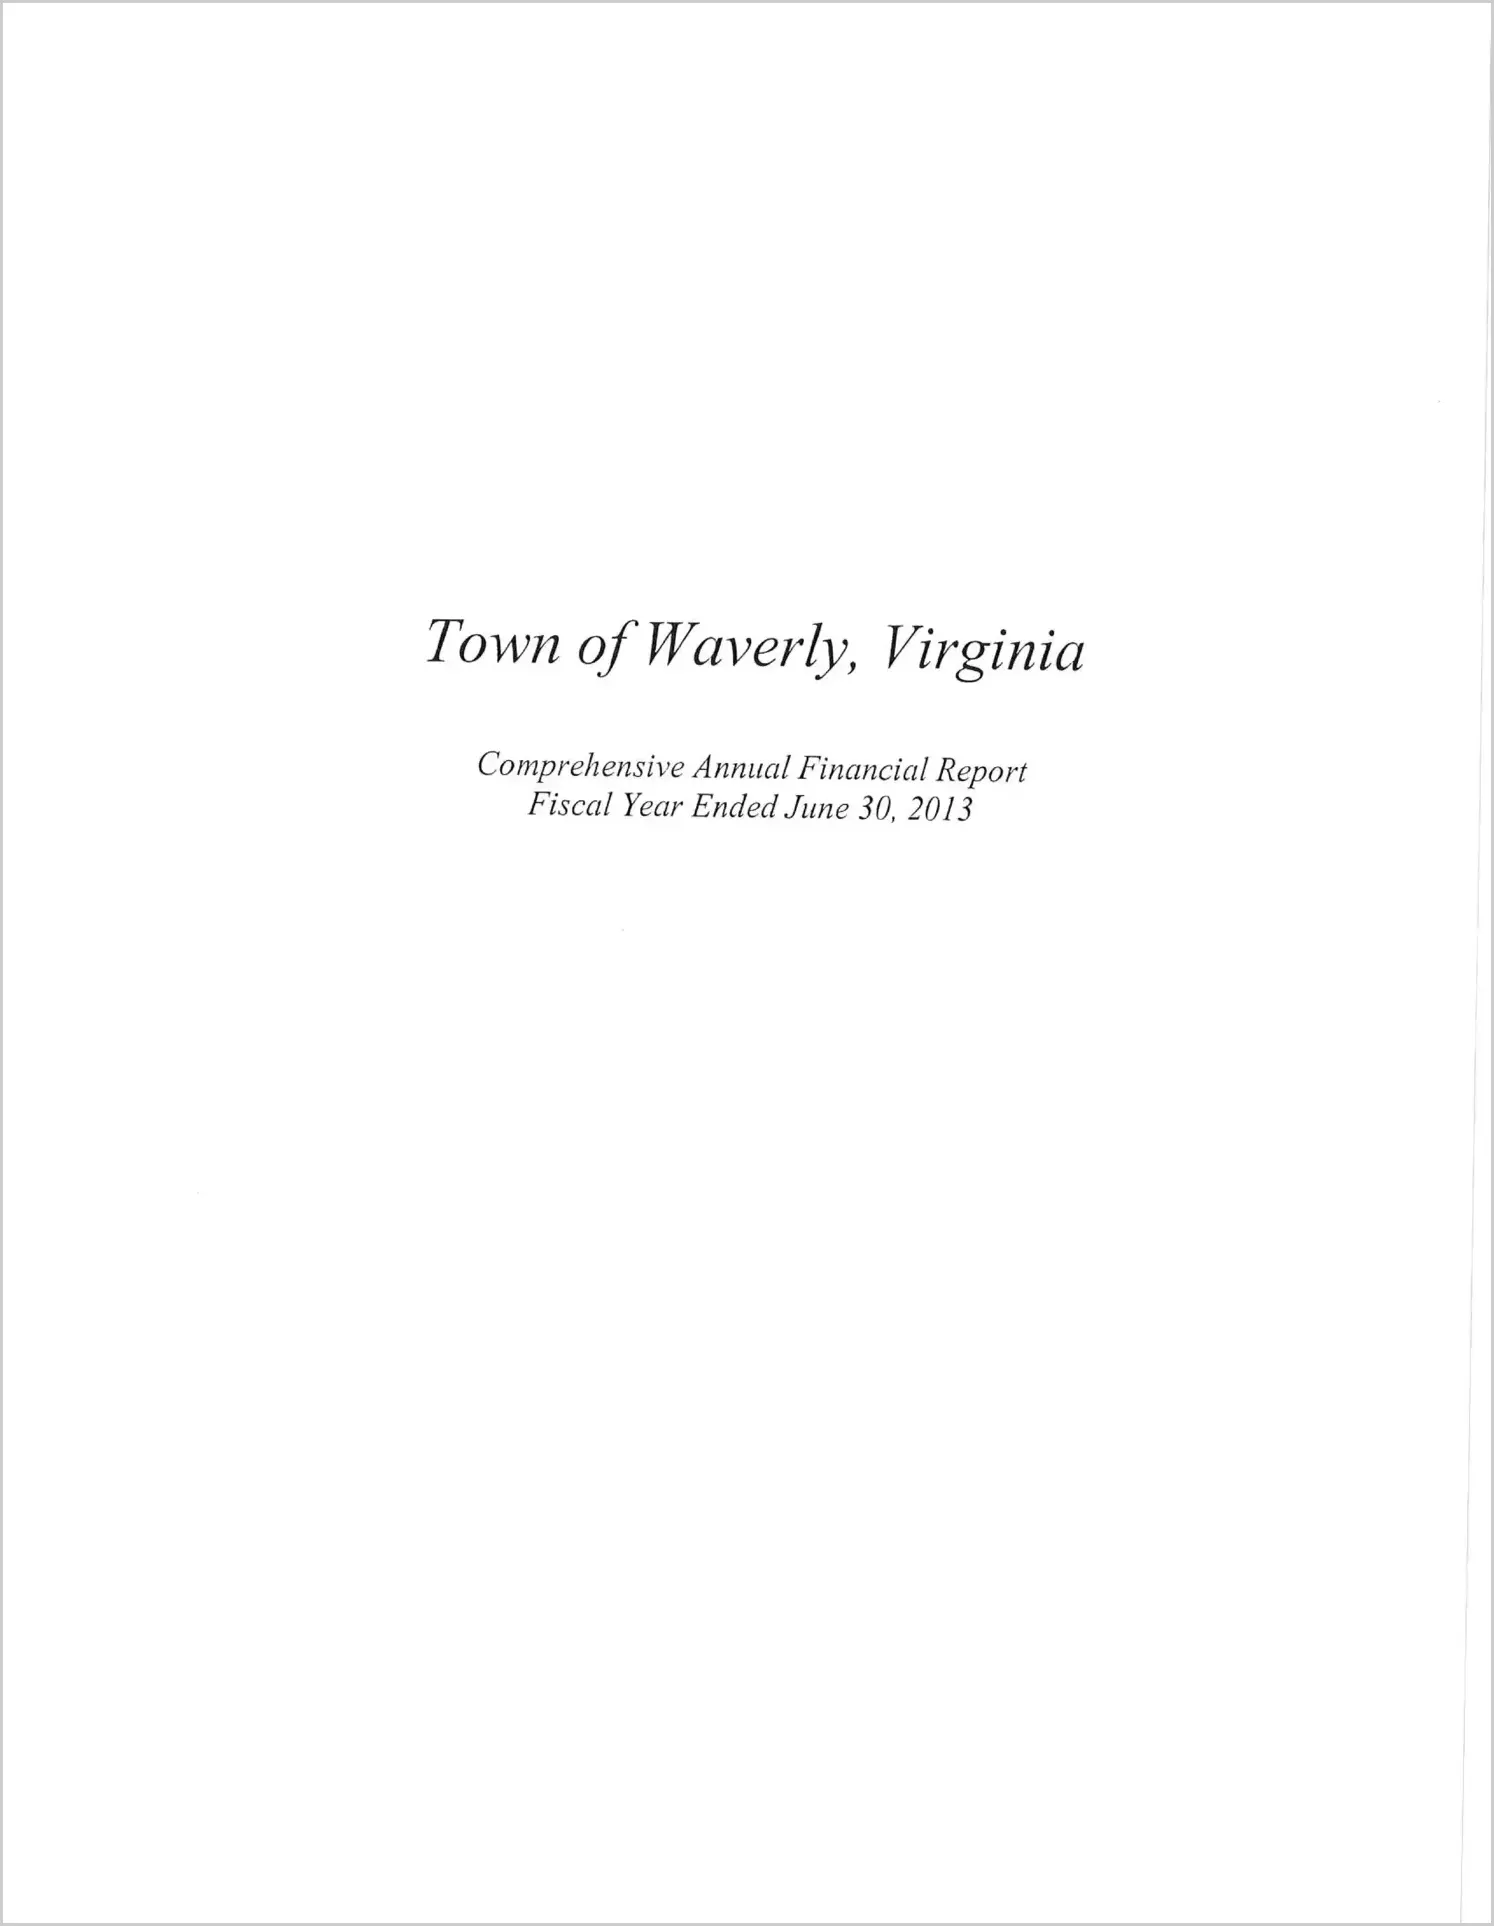 2013 Annual Financial Report for Town of Waverly